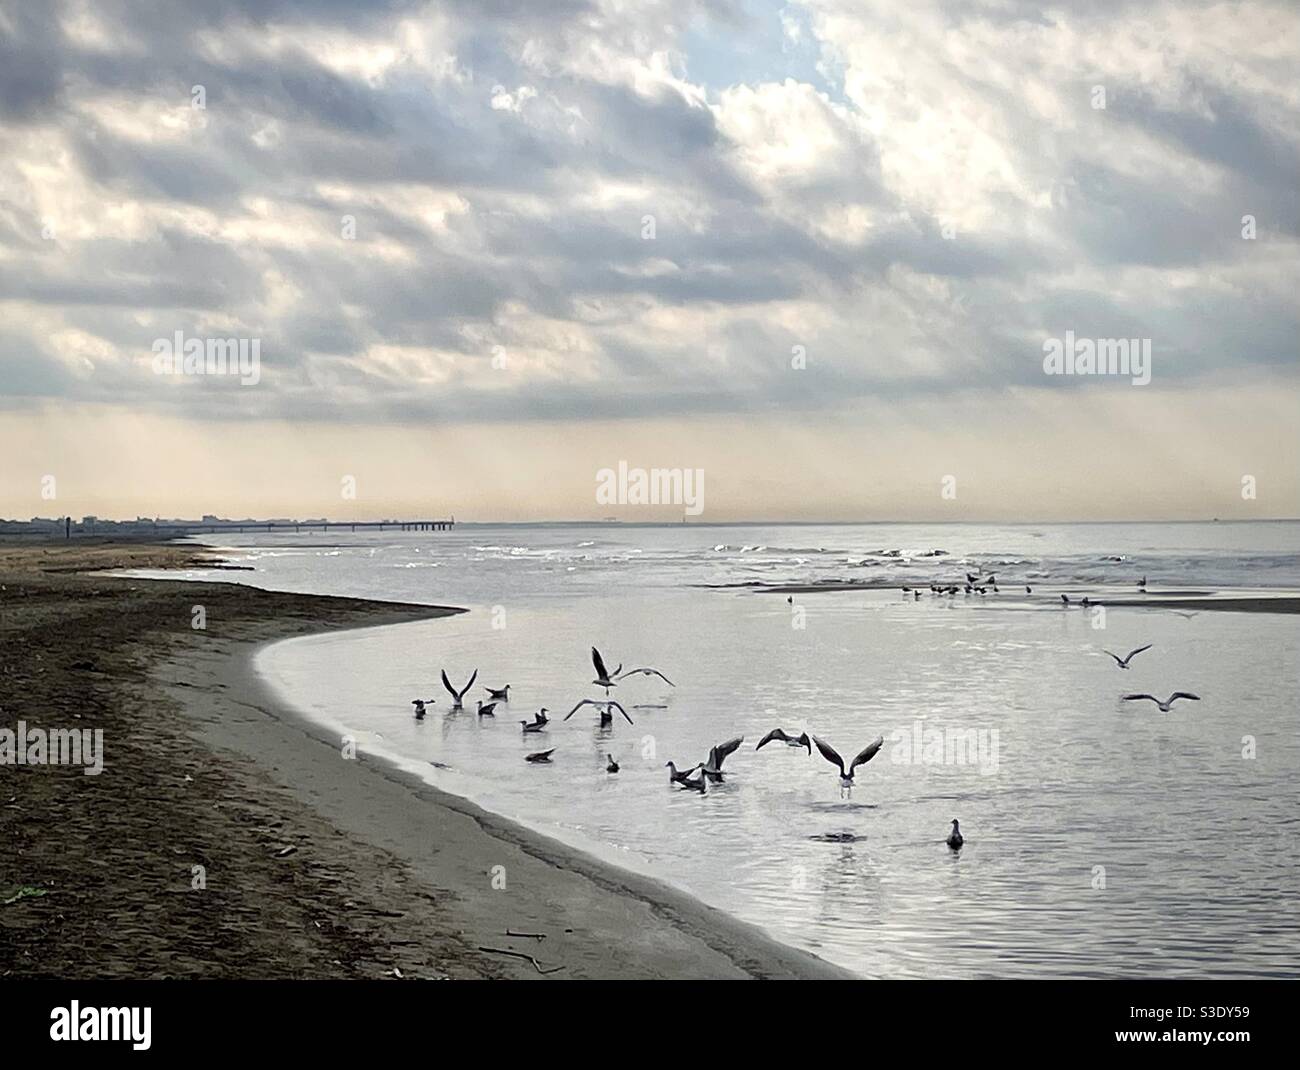 Flock of seagulls resting in the water off the shore in Forte dei marmi best the beach Italy Stock Photo